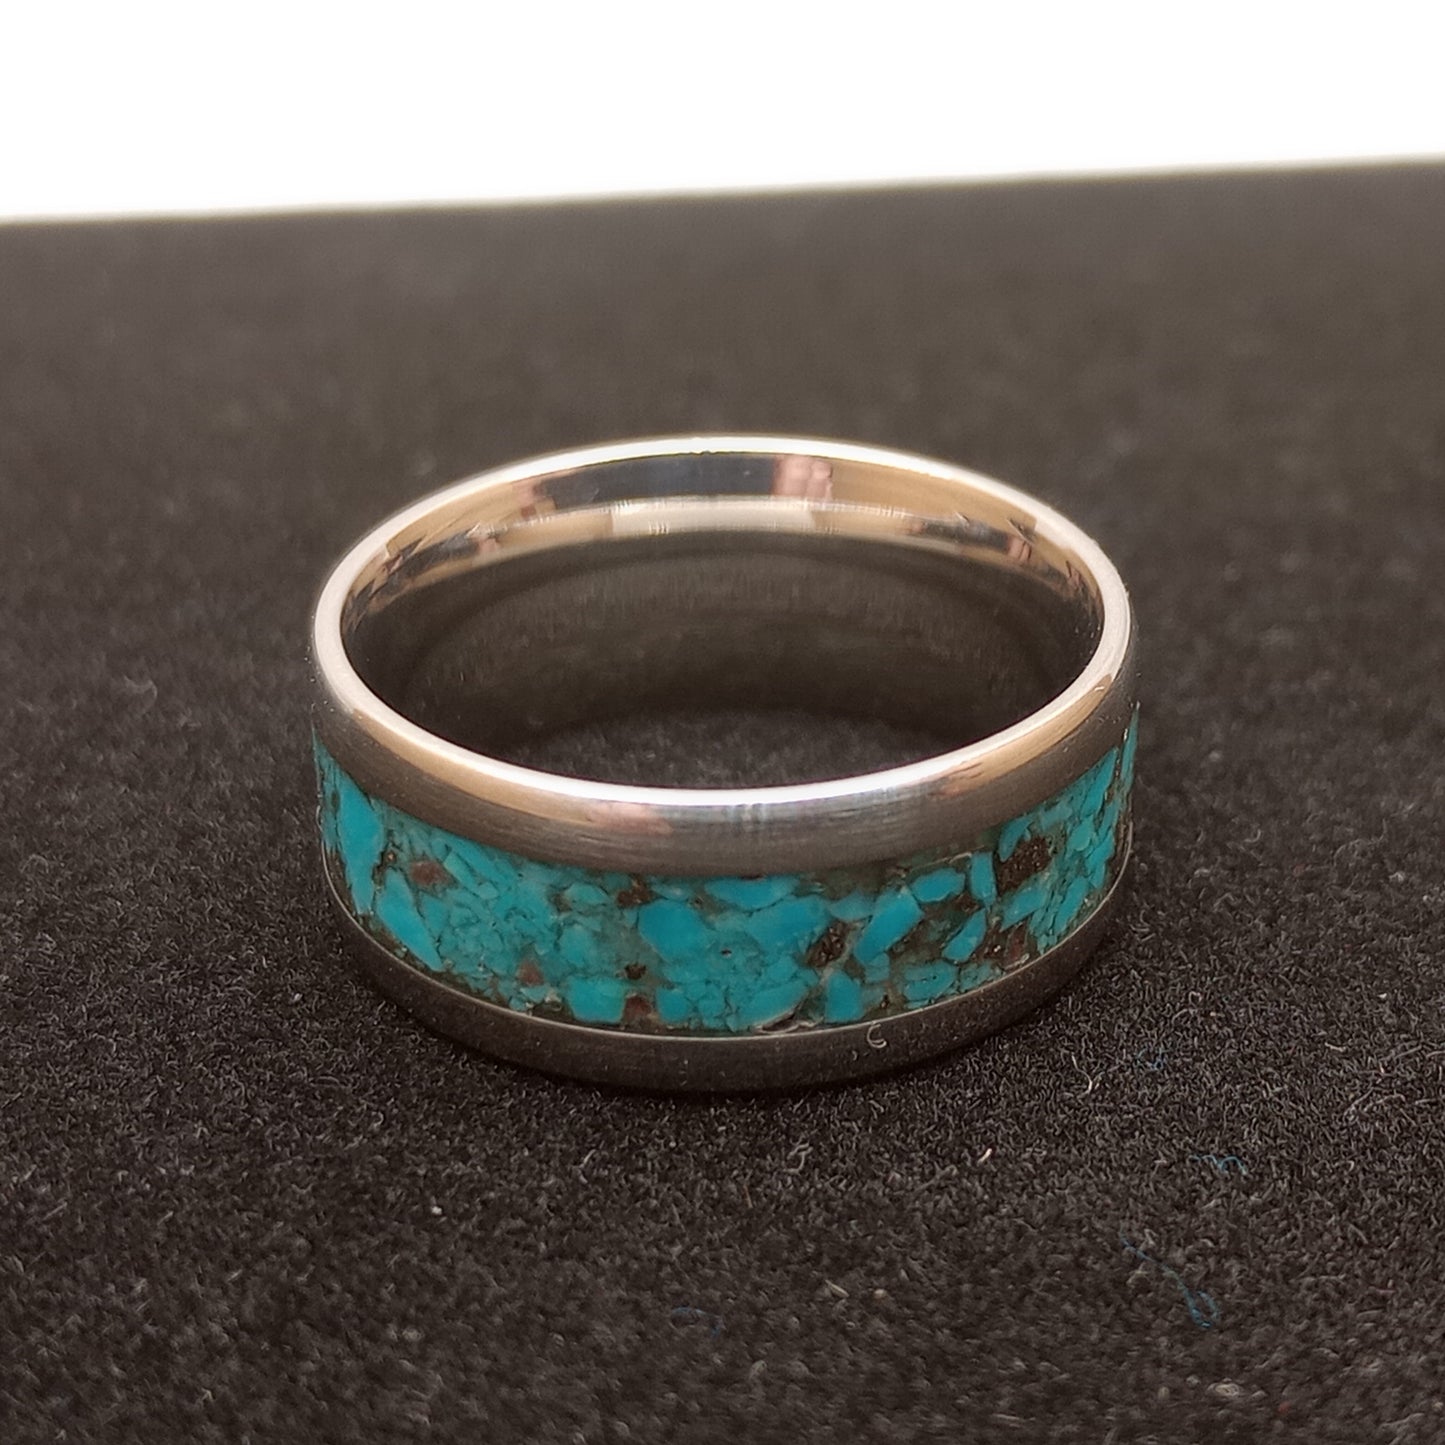 Turquoise and Pyrite Stainless Steel Ring Size 7